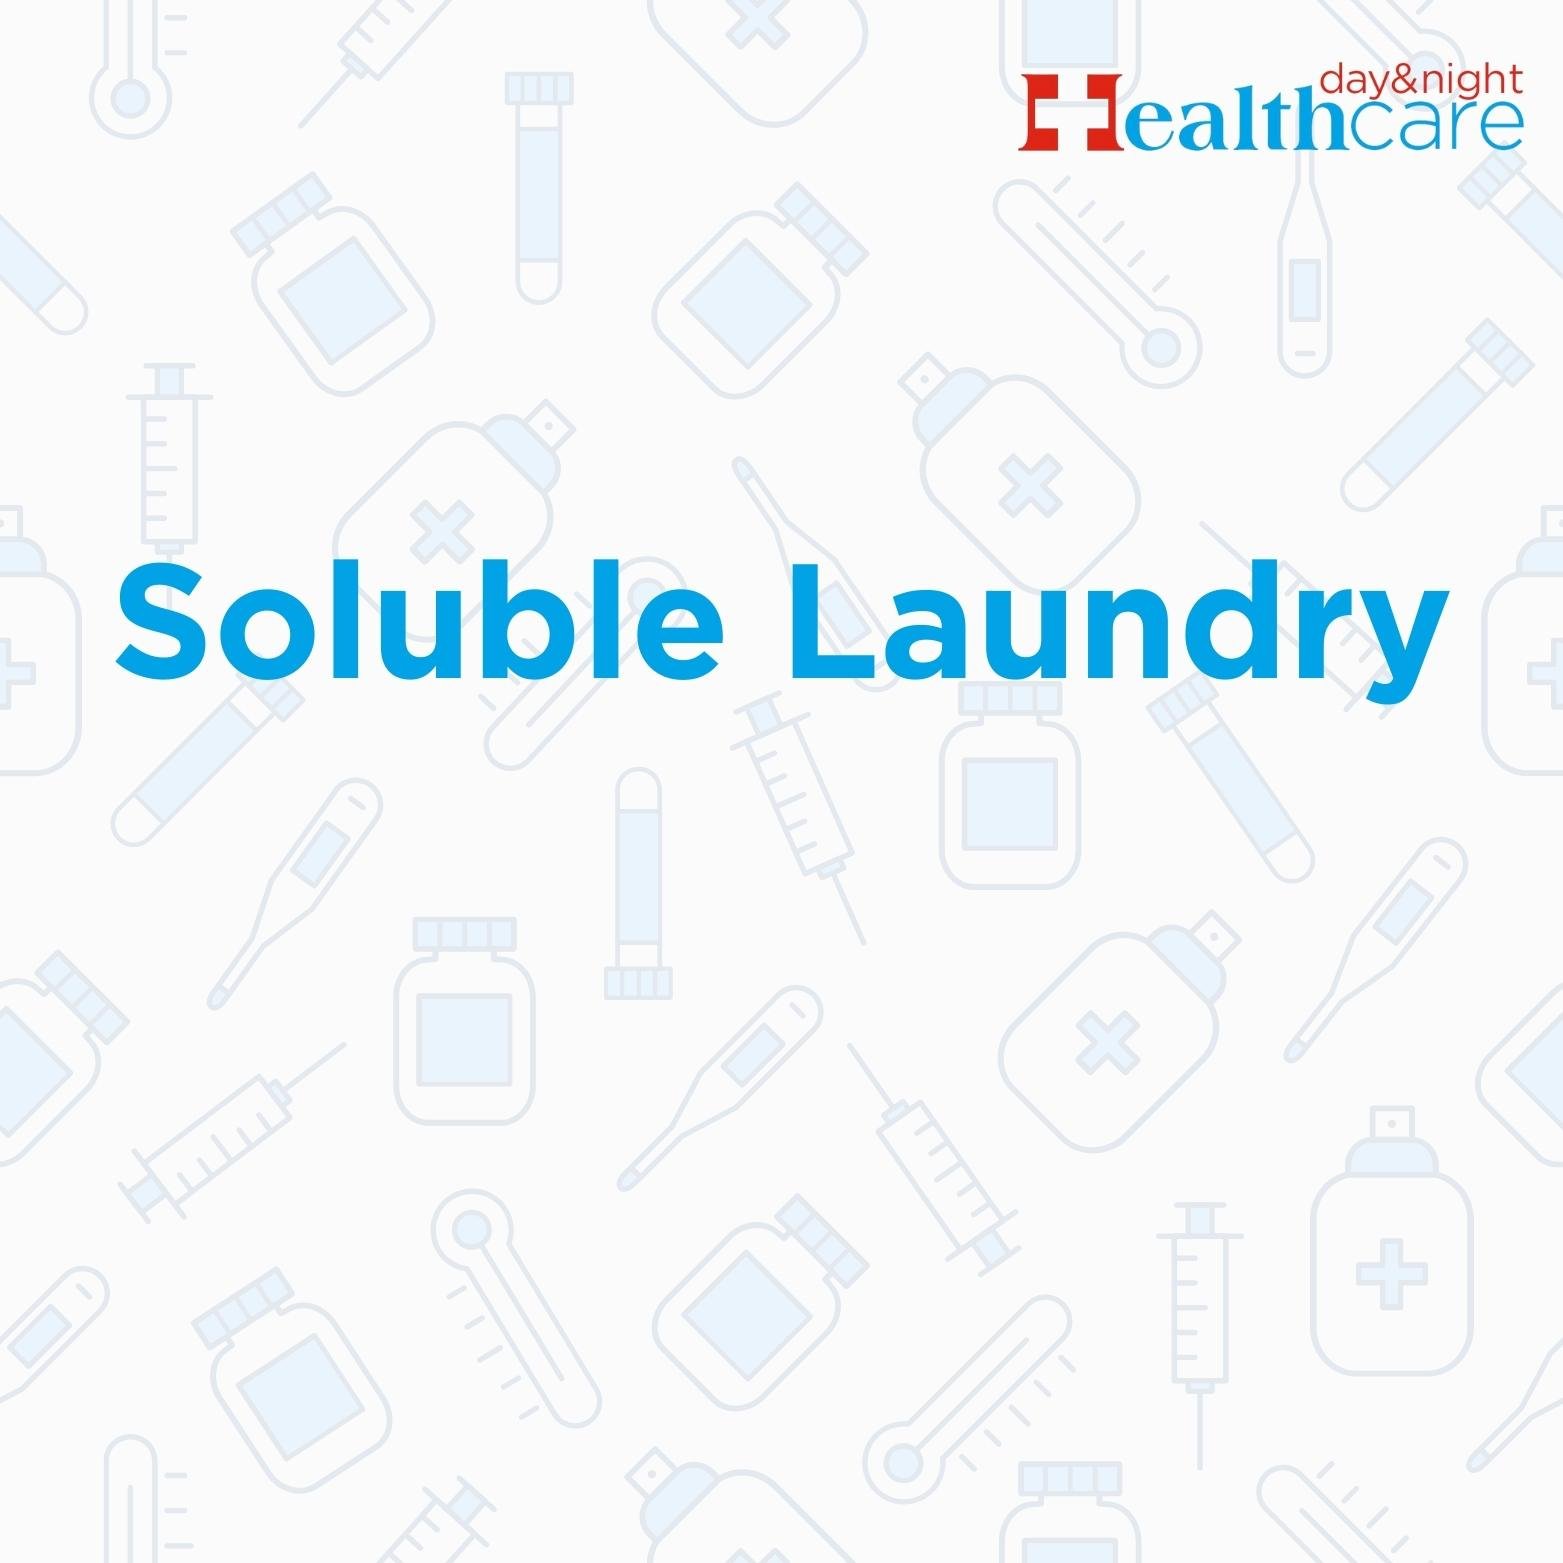 Soluble Laundry